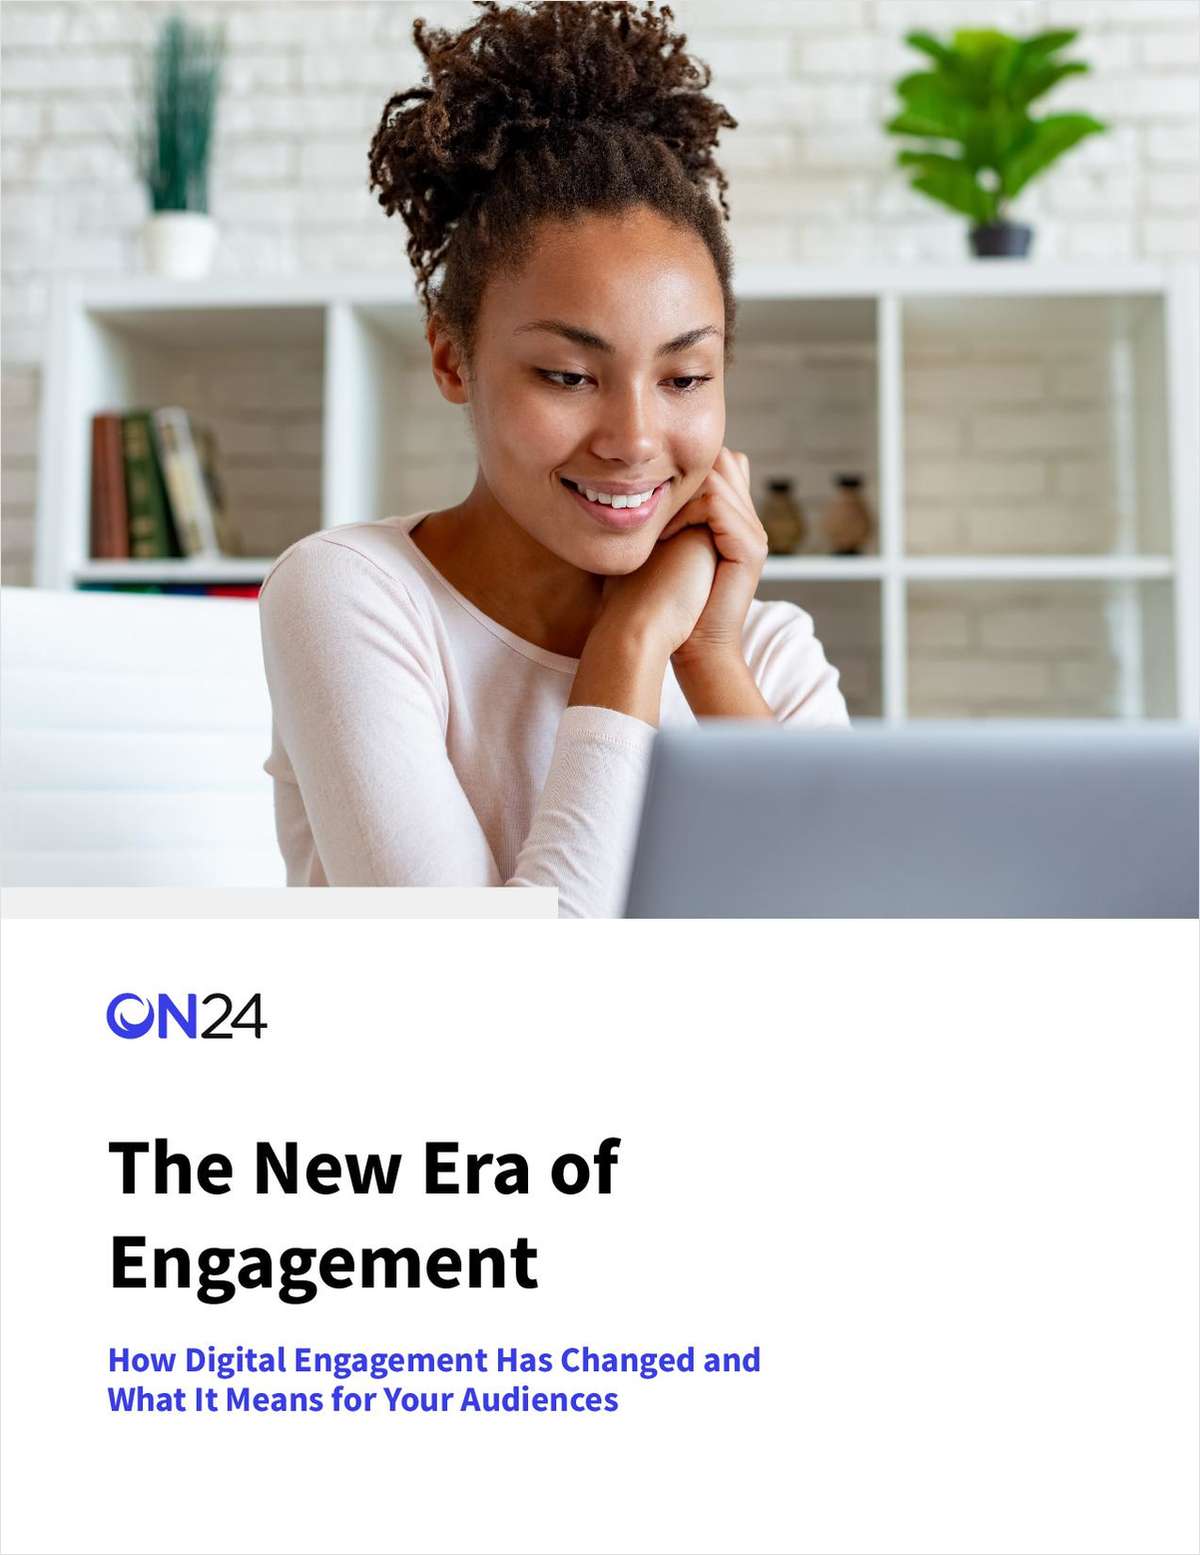 The New Era of Engagement